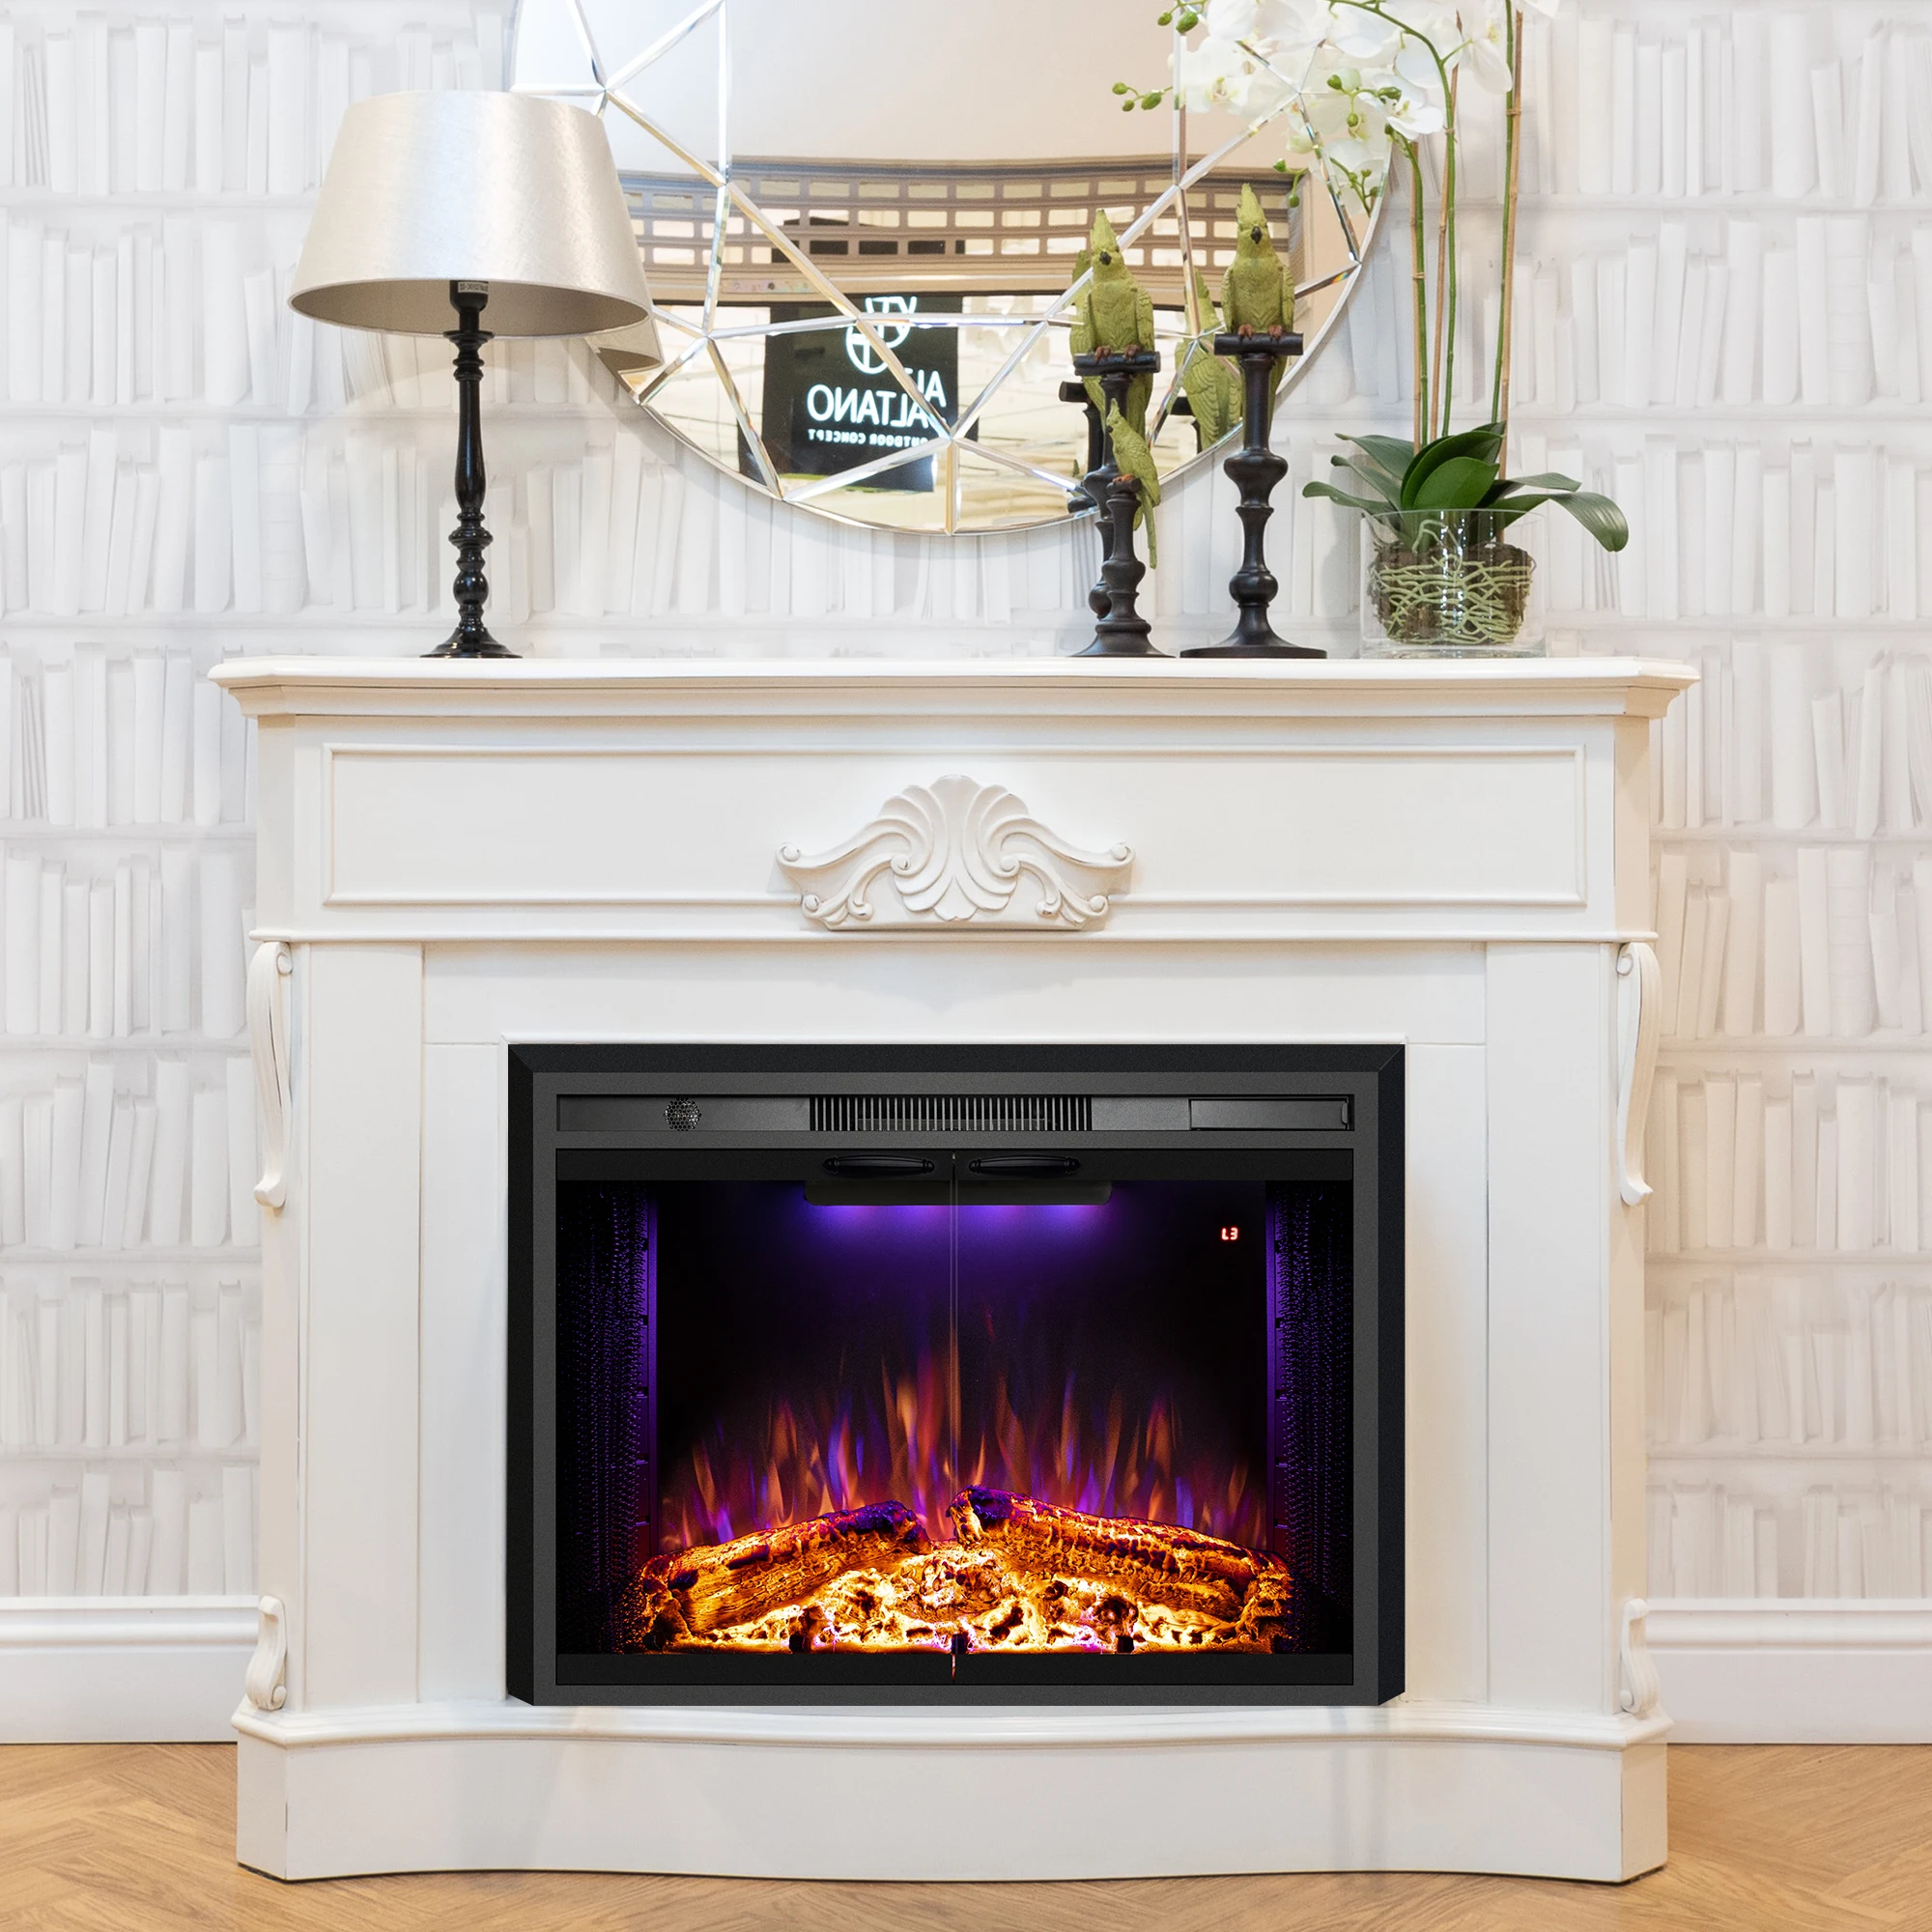 Luxstar 25 Inches Recessed Wholesale Electric Fireplace Inserts with Glass Door Decorative Fireplace with Fire Crackling Sound